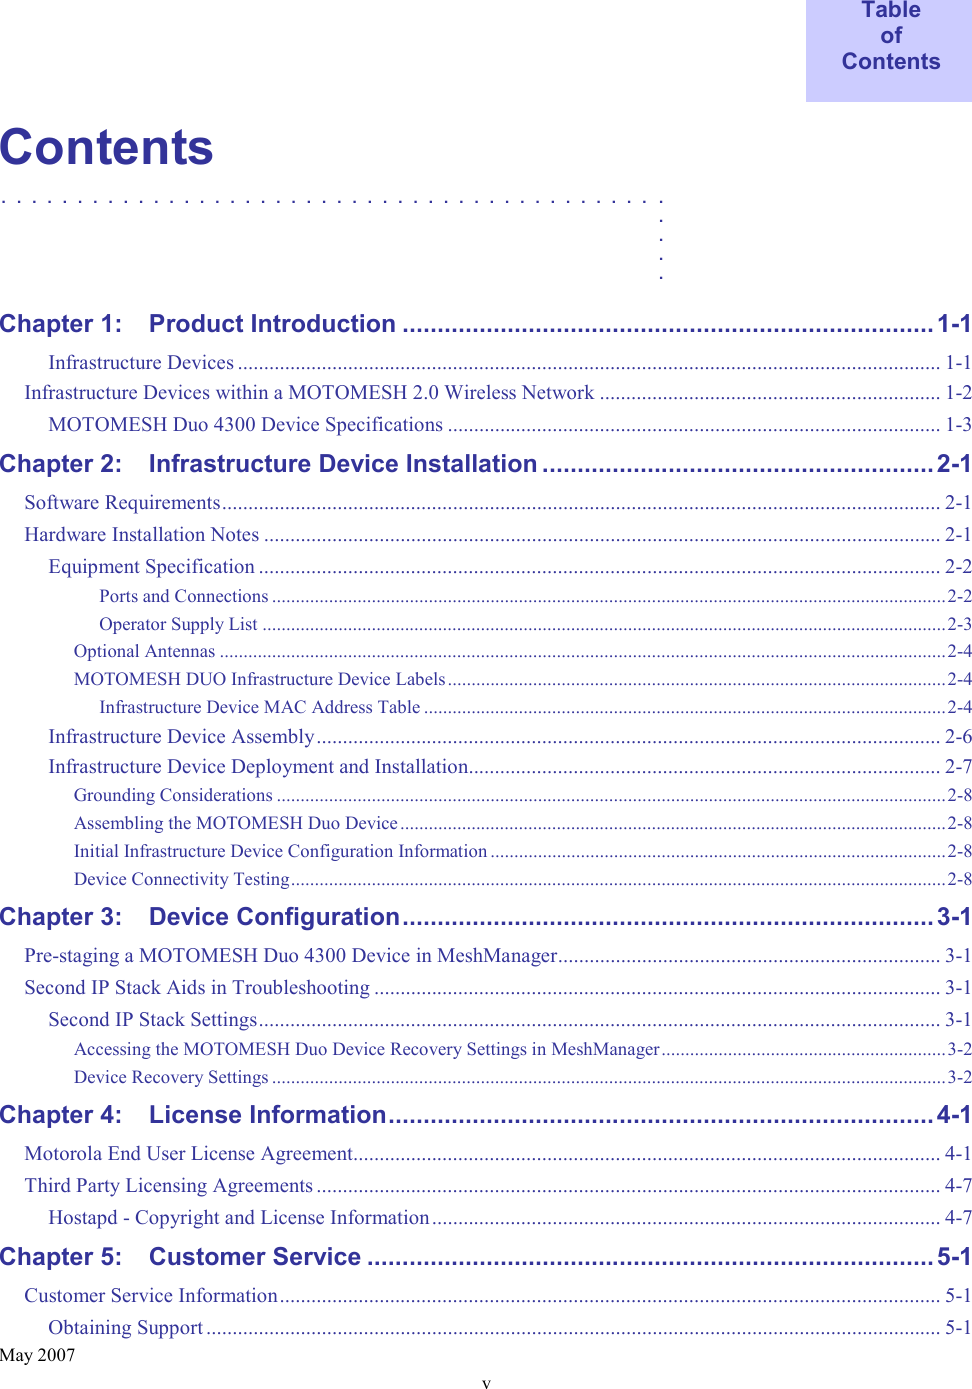    May 2007 v  Table of Contents  Contents ............................................   .    .    .    .  Chapter 1: Product Introduction ............................................................................1-1 Infrastructure Devices ...................................................................................................................................... 1-1 Infrastructure Devices within a MOTOMESH 2.0 Wireless Network ................................................................. 1-2 MOTOMESH Duo 4300 Device Specifications .............................................................................................. 1-3 Chapter 2: Infrastructure Device Installation ........................................................2-1 Software Requirements......................................................................................................................................... 2-1 Hardware Installation Notes ................................................................................................................................. 2-1 Equipment Specification .................................................................................................................................. 2-2 Ports and Connections ..............................................................................................................................................2-2 Operator Supply List ................................................................................................................................................2-3 Optional Antennas .........................................................................................................................................................2-4 MOTOMESH DUO Infrastructure Device Labels.........................................................................................................2-4 Infrastructure Device MAC Address Table ..............................................................................................................2-4 Infrastructure Device Assembly....................................................................................................................... 2-6 Infrastructure Device Deployment and Installation.......................................................................................... 2-7 Grounding Considerations .............................................................................................................................................2-8 Assembling the MOTOMESH Duo Device...................................................................................................................2-8 Initial Infrastructure Device Configuration Information ................................................................................................2-8 Device Connectivity Testing..........................................................................................................................................2-8 Chapter 3: Device Configuration............................................................................3-1 Pre-staging a MOTOMESH Duo 4300 Device in MeshManager......................................................................... 3-1 Second IP Stack Aids in Troubleshooting ............................................................................................................ 3-1 Second IP Stack Settings.................................................................................................................................. 3-1 Accessing the MOTOMESH Duo Device Recovery Settings in MeshManager............................................................3-2 Device Recovery Settings ..............................................................................................................................................3-2 Chapter 4: License Information.............................................................................. 4-1 Motorola End User License Agreement................................................................................................................ 4-1 Third Party Licensing Agreements ....................................................................................................................... 4-7 Hostapd - Copyright and License Information................................................................................................. 4-7 Chapter 5: Customer Service .................................................................................5-1 Customer Service Information.............................................................................................................................. 5-1 Obtaining Support ............................................................................................................................................ 5-1 